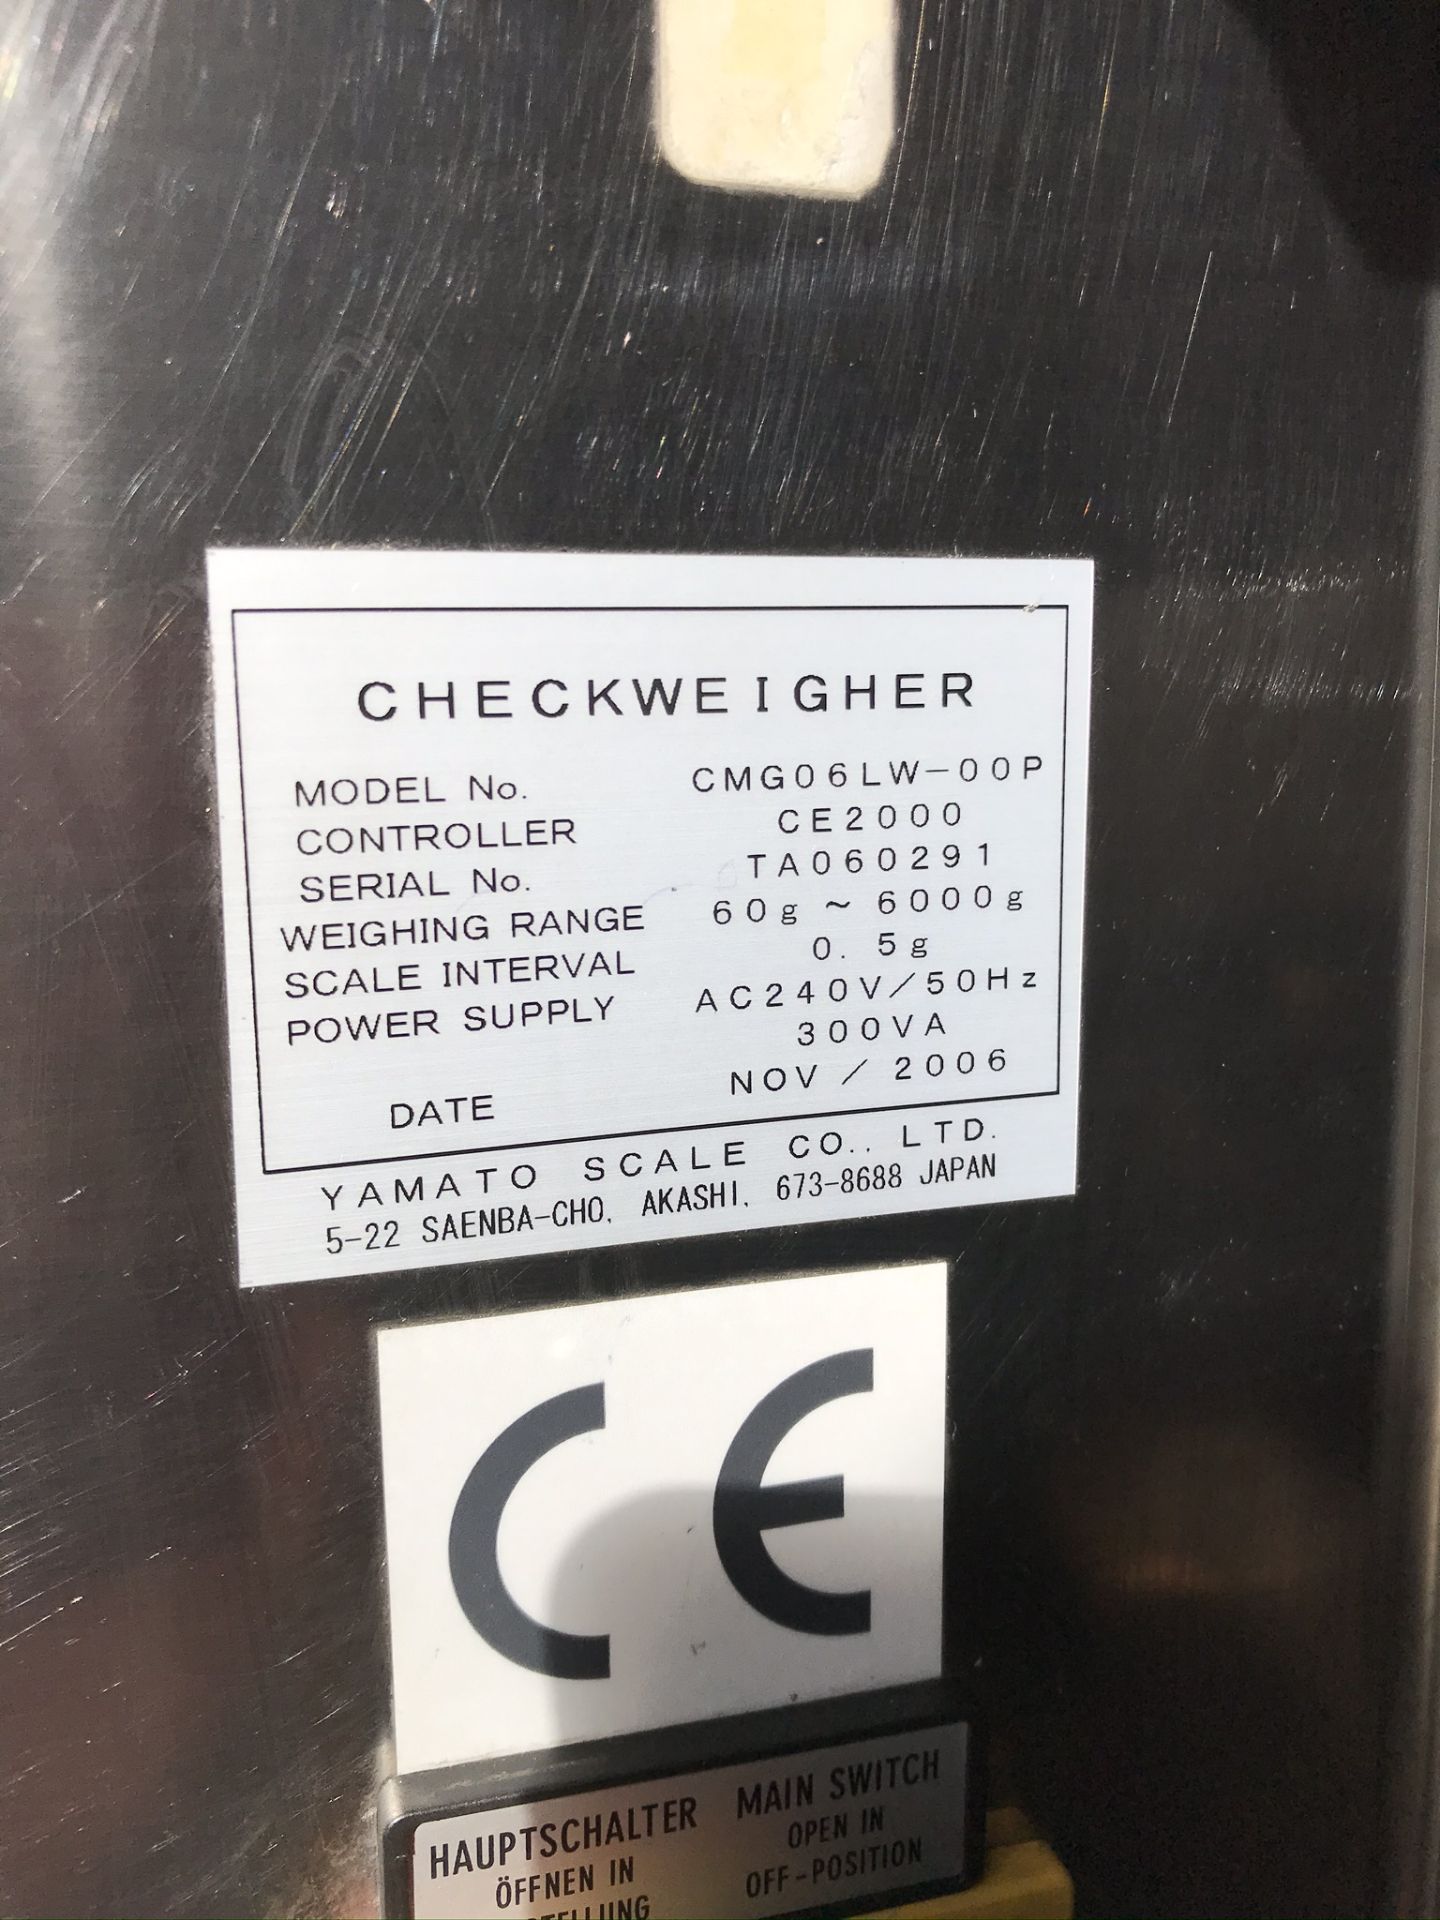 Checkweigher - Image 6 of 6